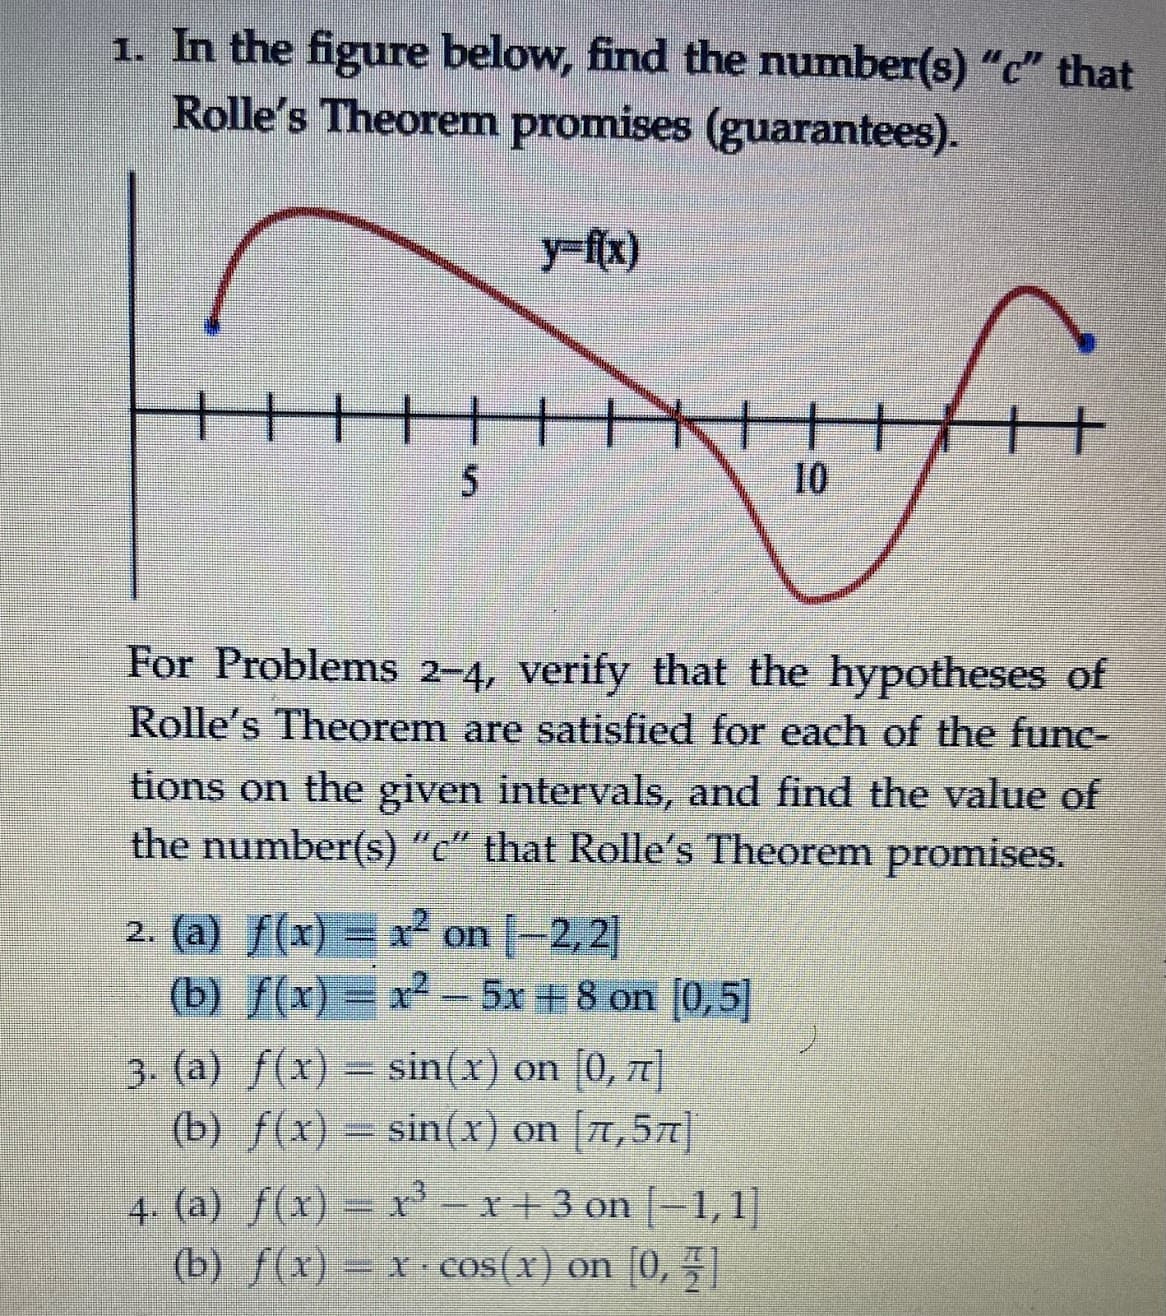 1. In the figure below, find the number(s) "c" that
Rolle's Theorem promises (guarantees).
10
For Problems 2–4, verify that the hypotheses of
Rolle's Theorem are satisfied for each of the func-
tions on the given intervals, and find the value of
the number(s) "c" that Rolle's Theorem promises.
2. (a) f(x) = x² on |-2, 2
(b) f(x) = x² =5x +8 on [0,5]
3. (a) f(x) = sin(x) on [0, 7]
(b) f(x) = sin(x) on [A,57]|
4. (a) f(x) = r-x+3 on | 1,1]
(b) f(x) = x cos(x) on (0,
[0, 1
